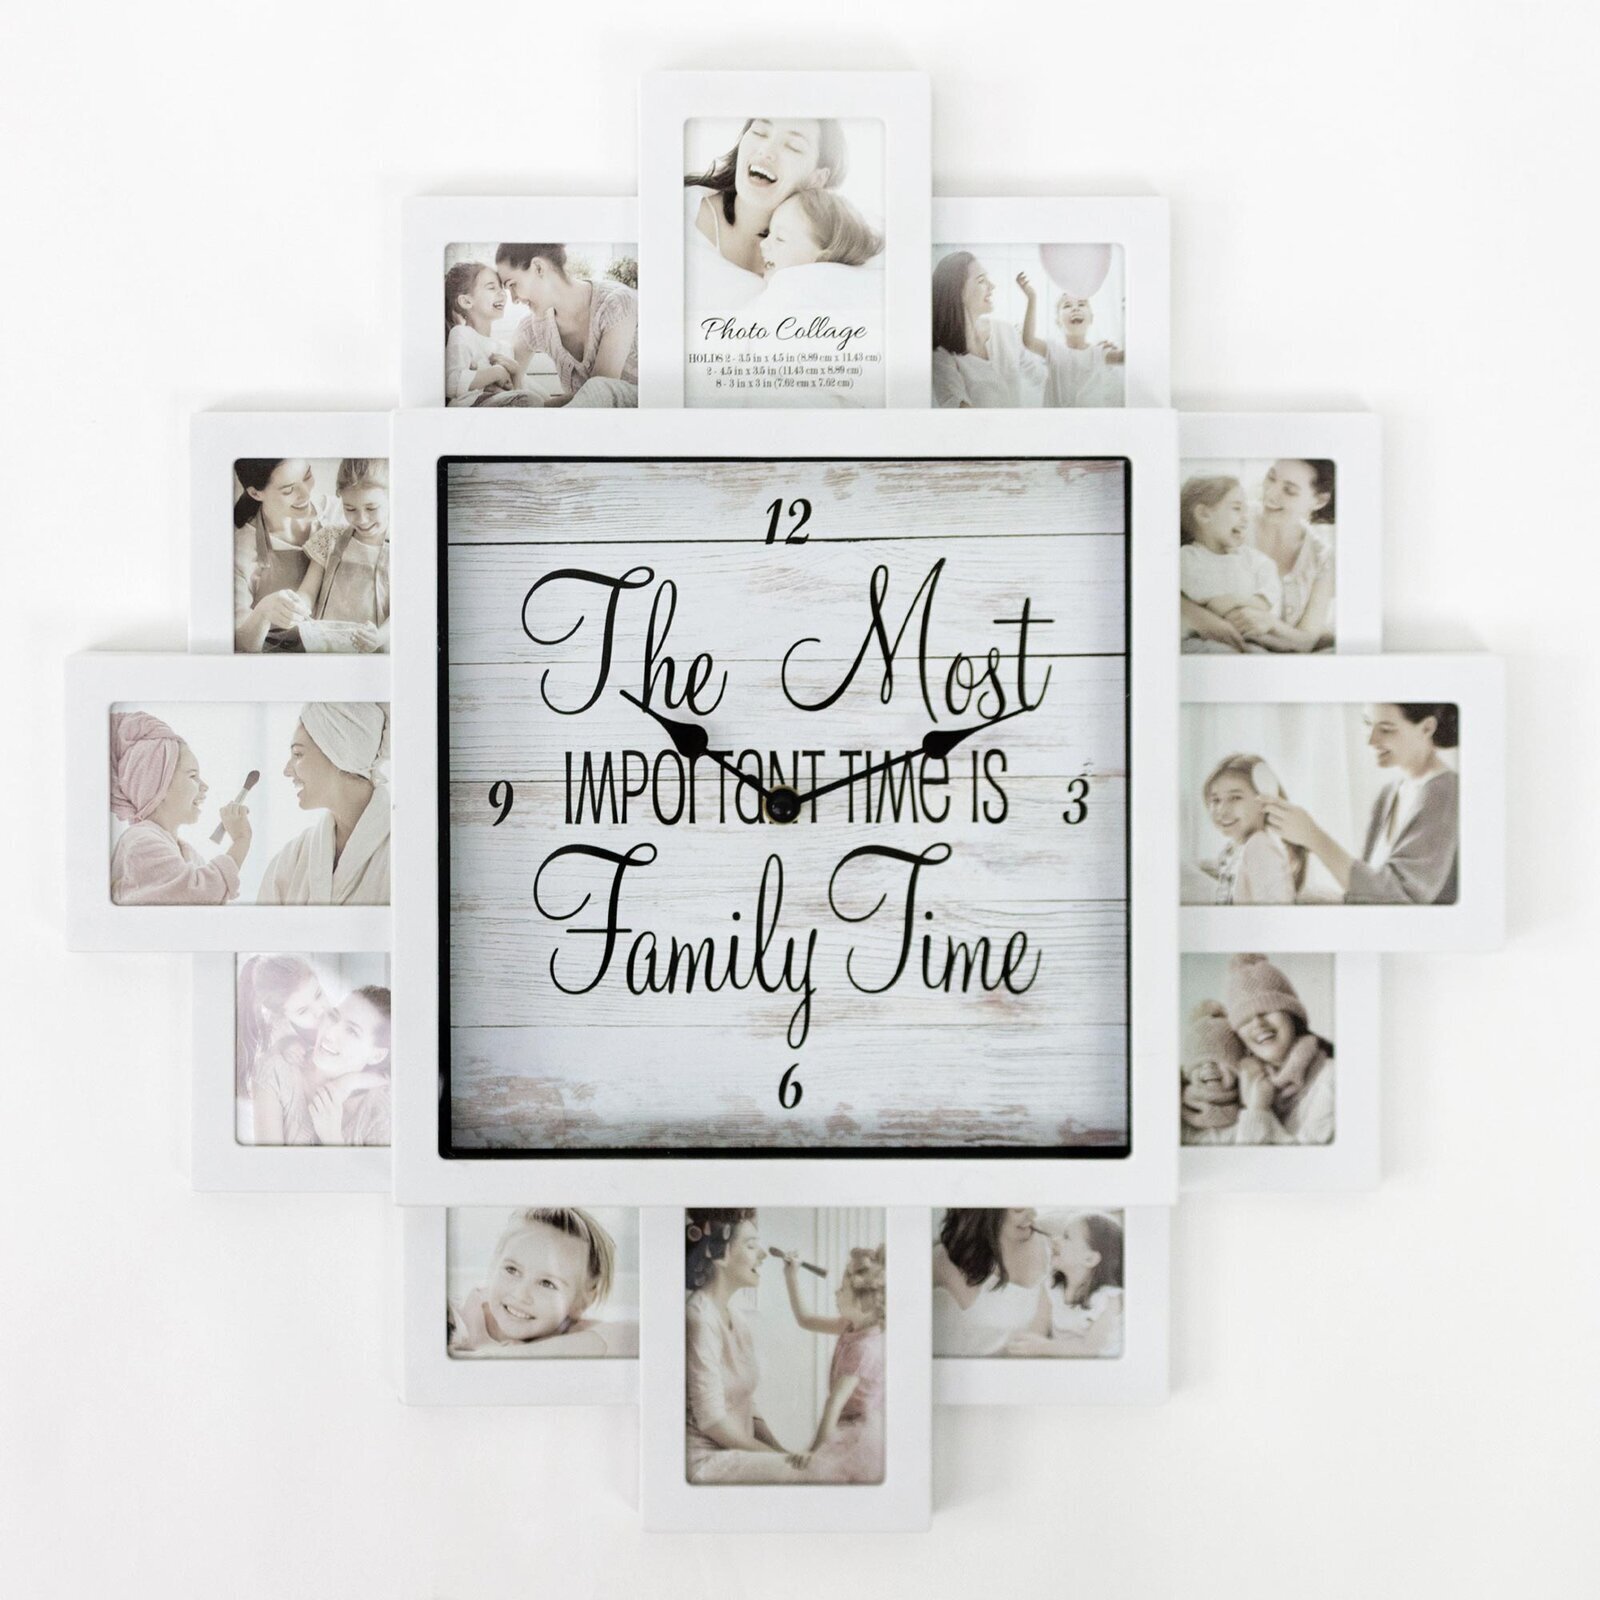 Family time wall clock